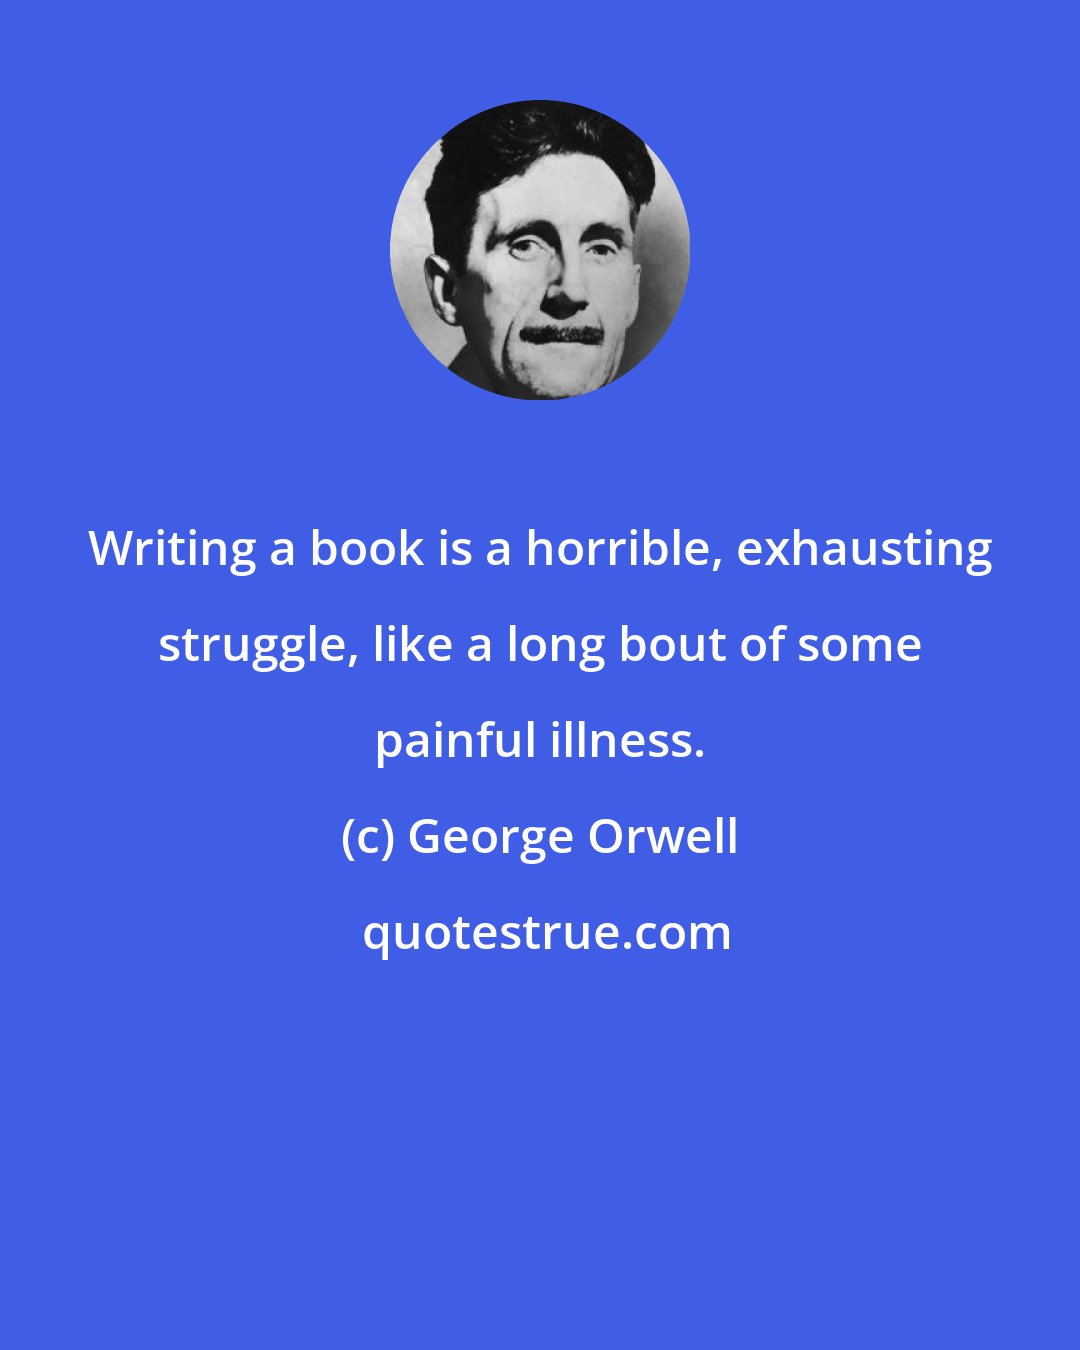 George Orwell: Writing a book is a horrible, exhausting struggle, like a long bout of some painful illness.